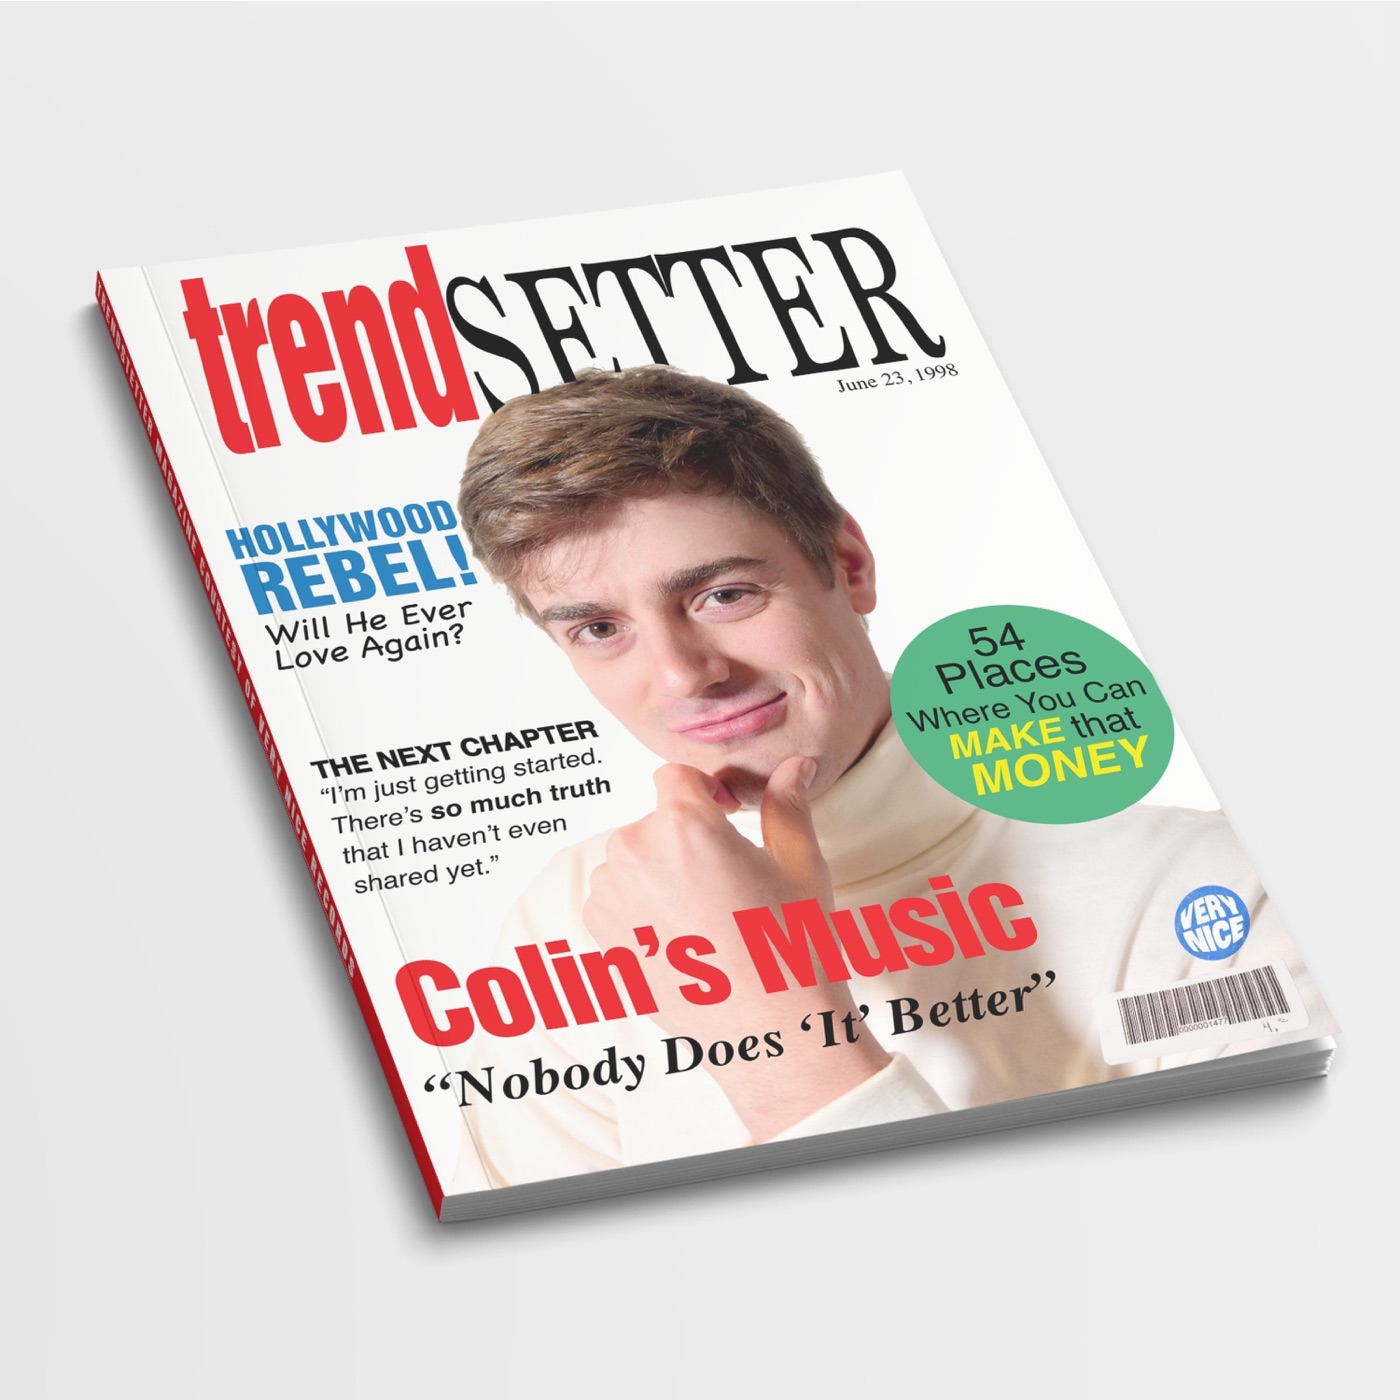 Trendsetter by Colin's Music